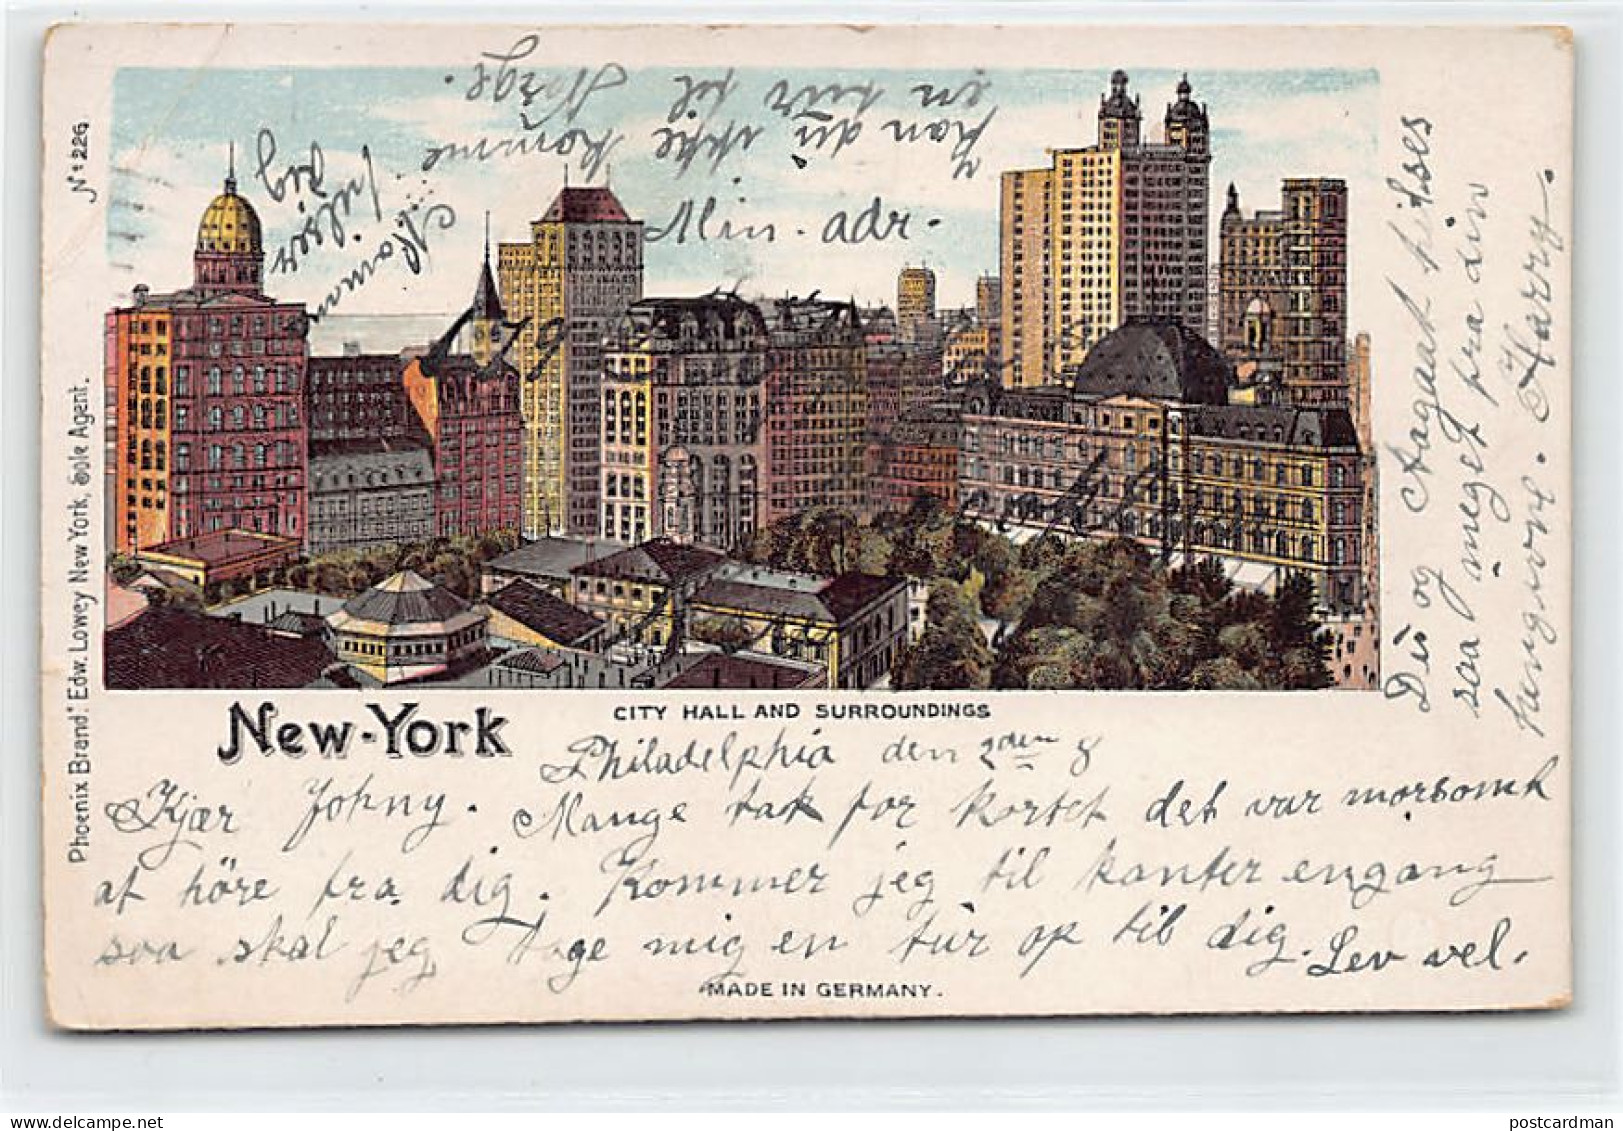 Usa - NEW YORK CITY - LITHO - City Hall And Surroundings - Publ. Edw. Lowey 226 - ONE CORNER FOLD - Indiaans (Noord-Amerikaans)